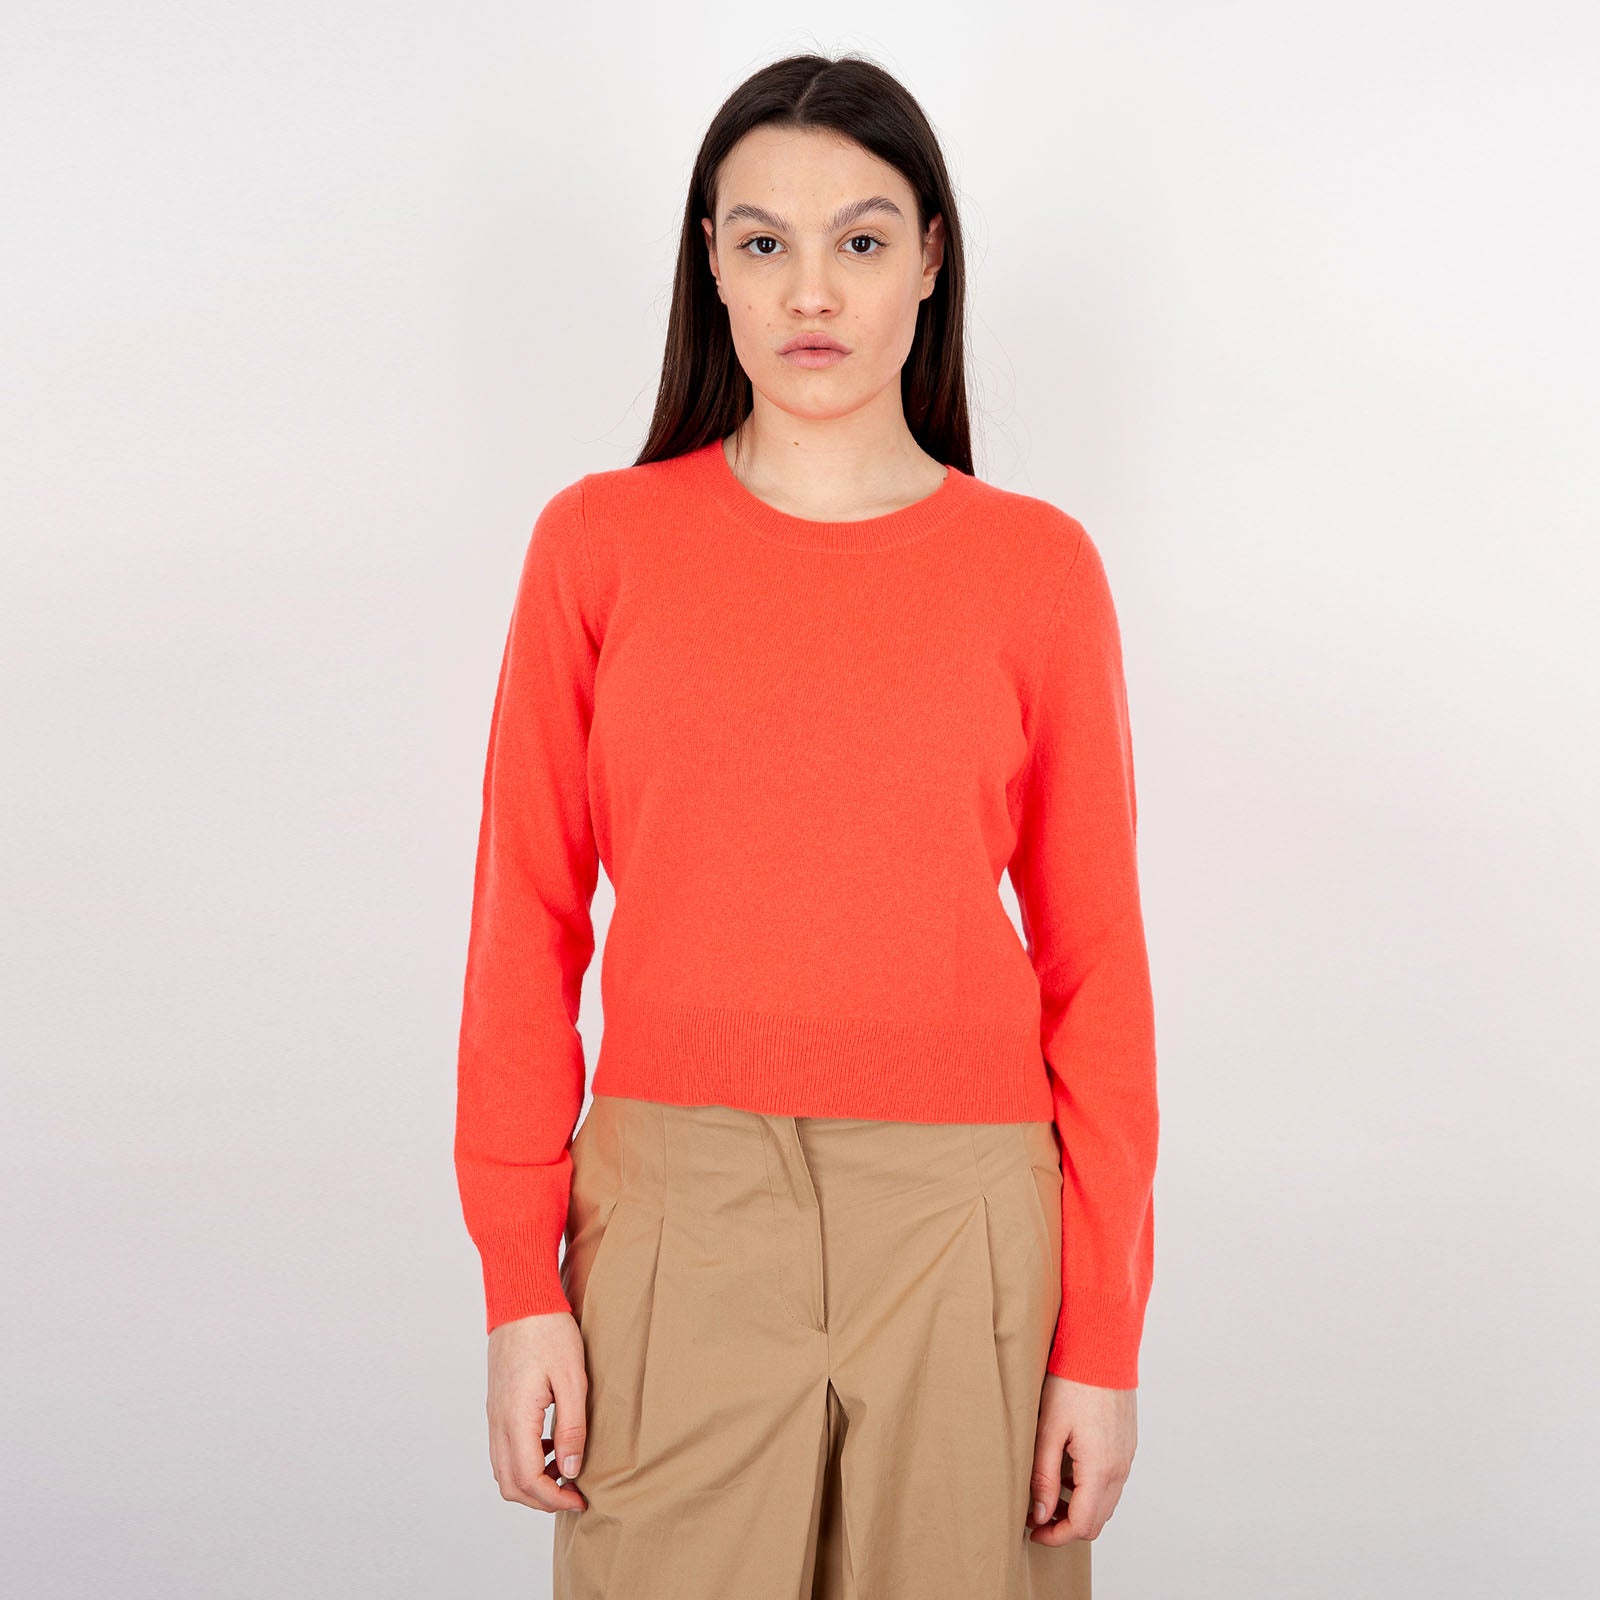 Absolut Cashmere Carlie Crewneck Sweater in Coral Wool - 5